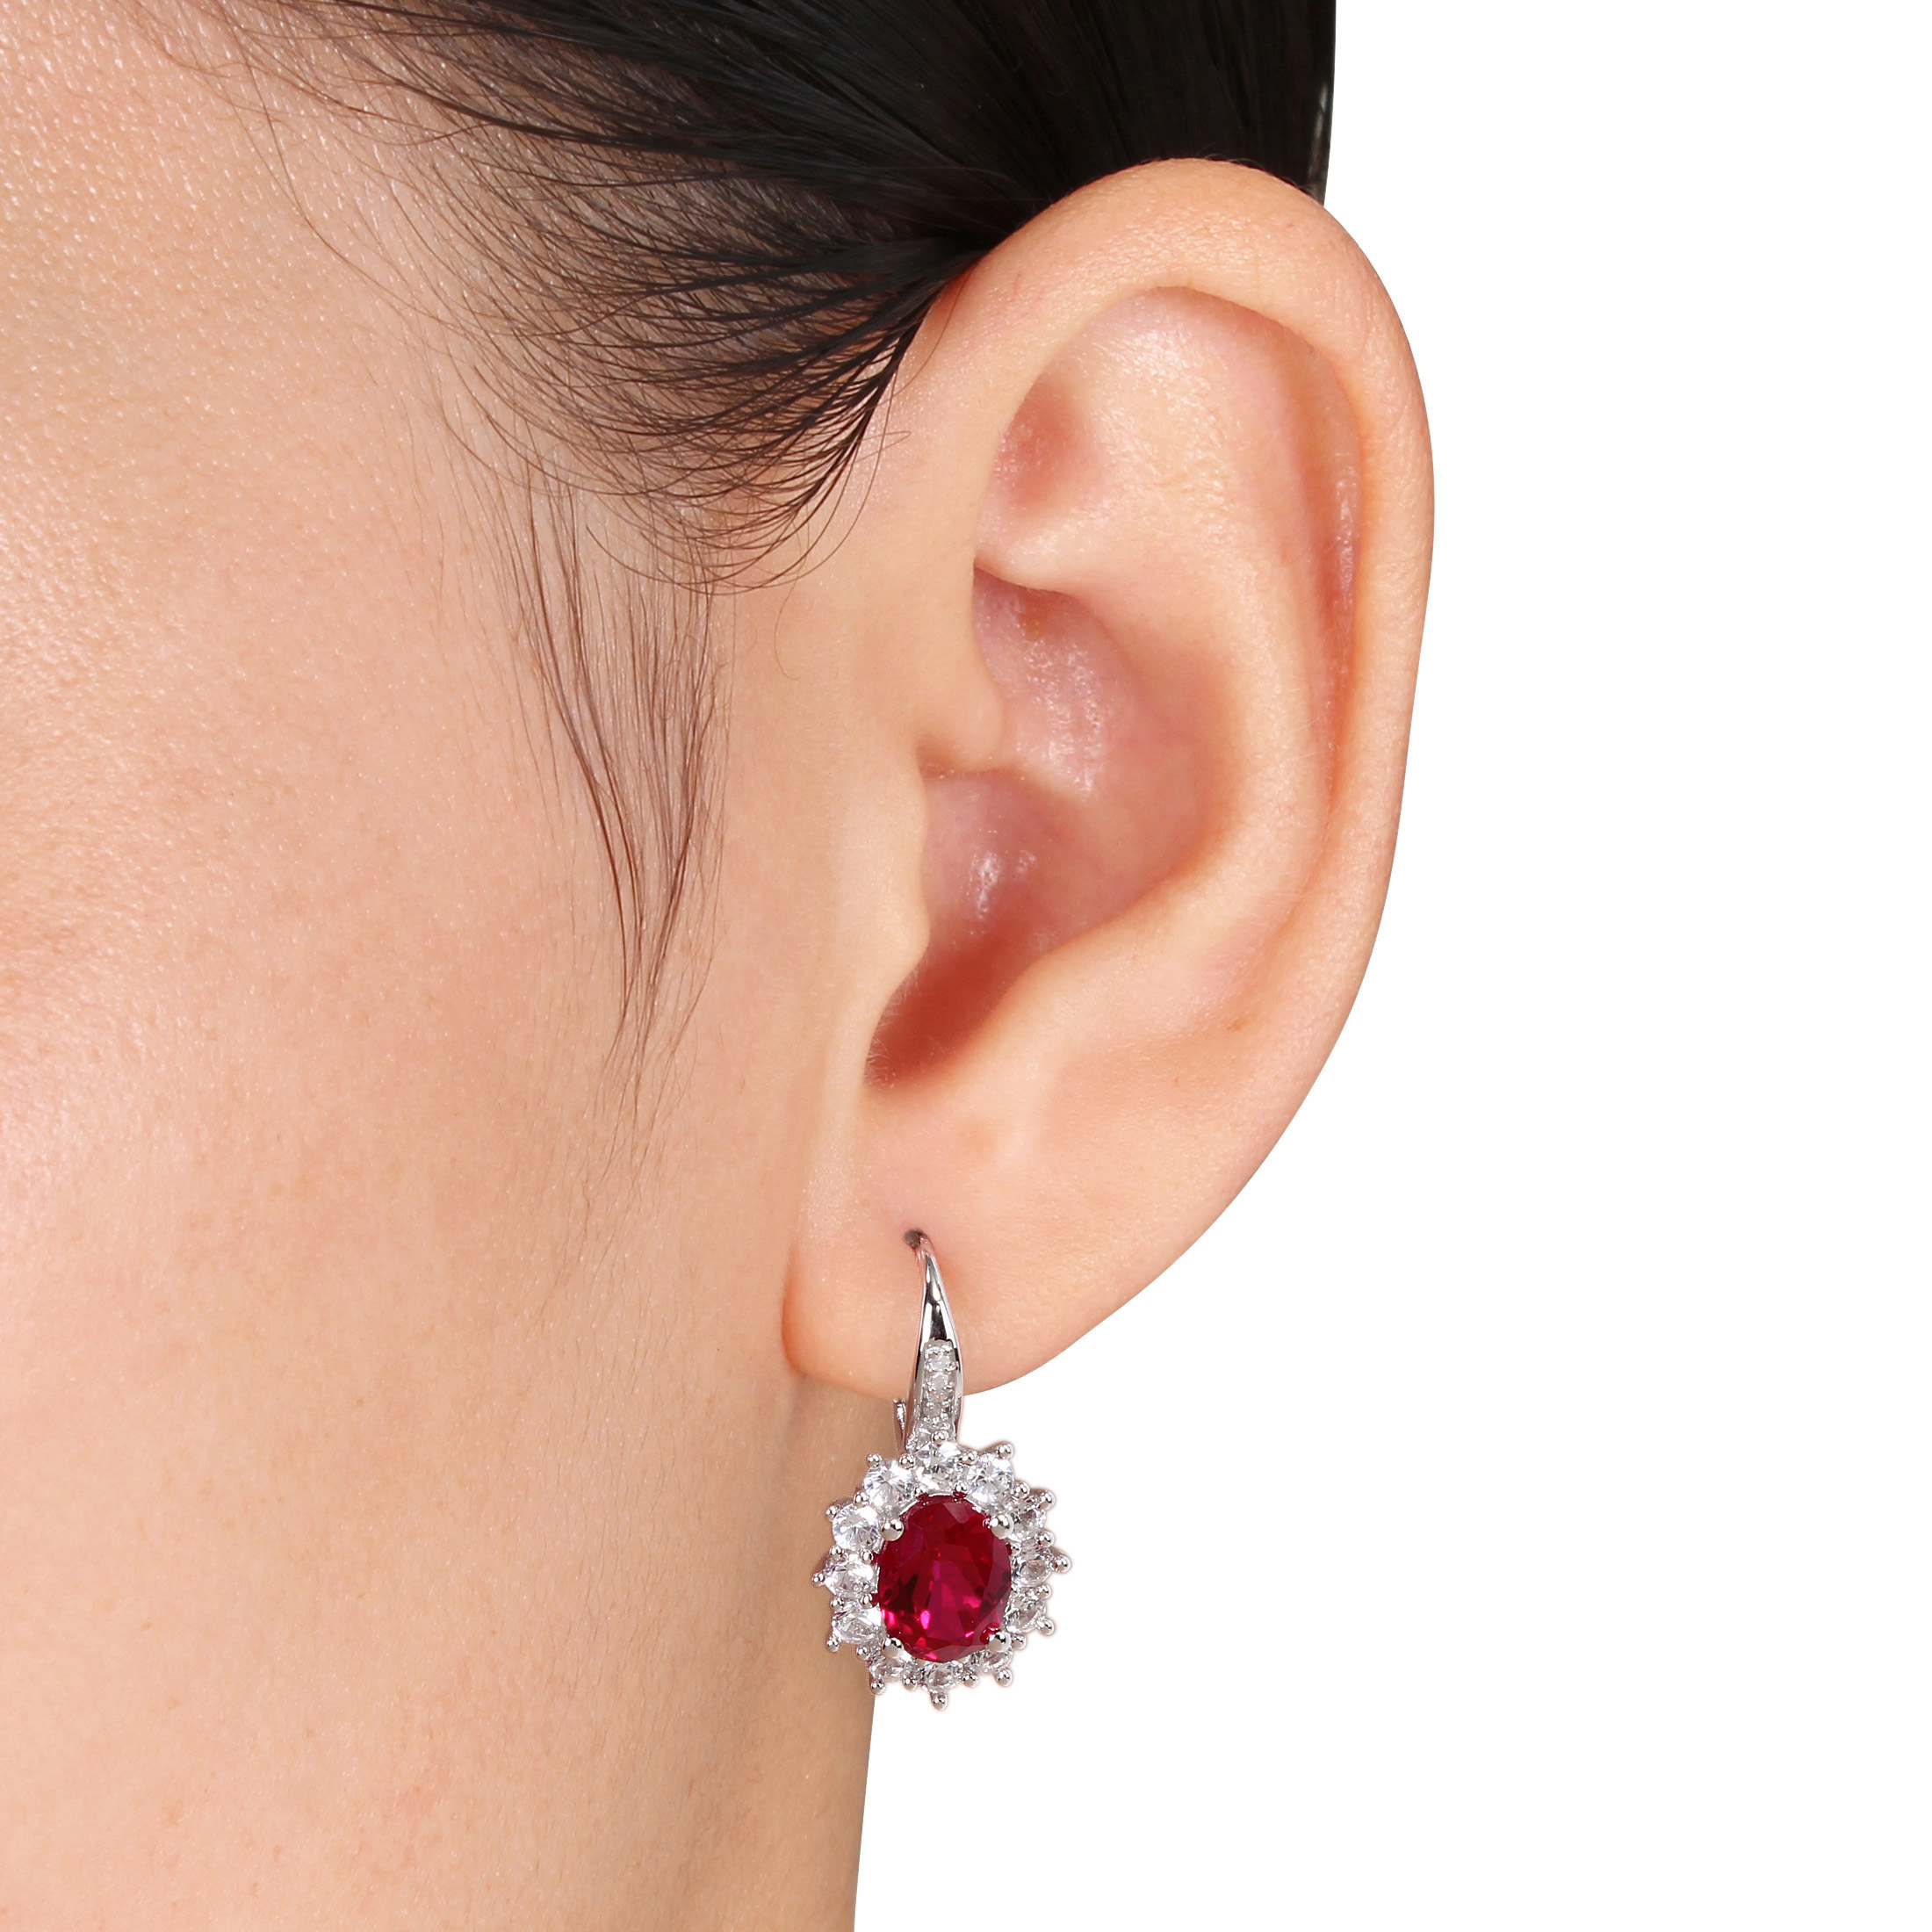 8 CT TGW Created Ruby and White Sapphire Leverback Earrings in Sterling Silver